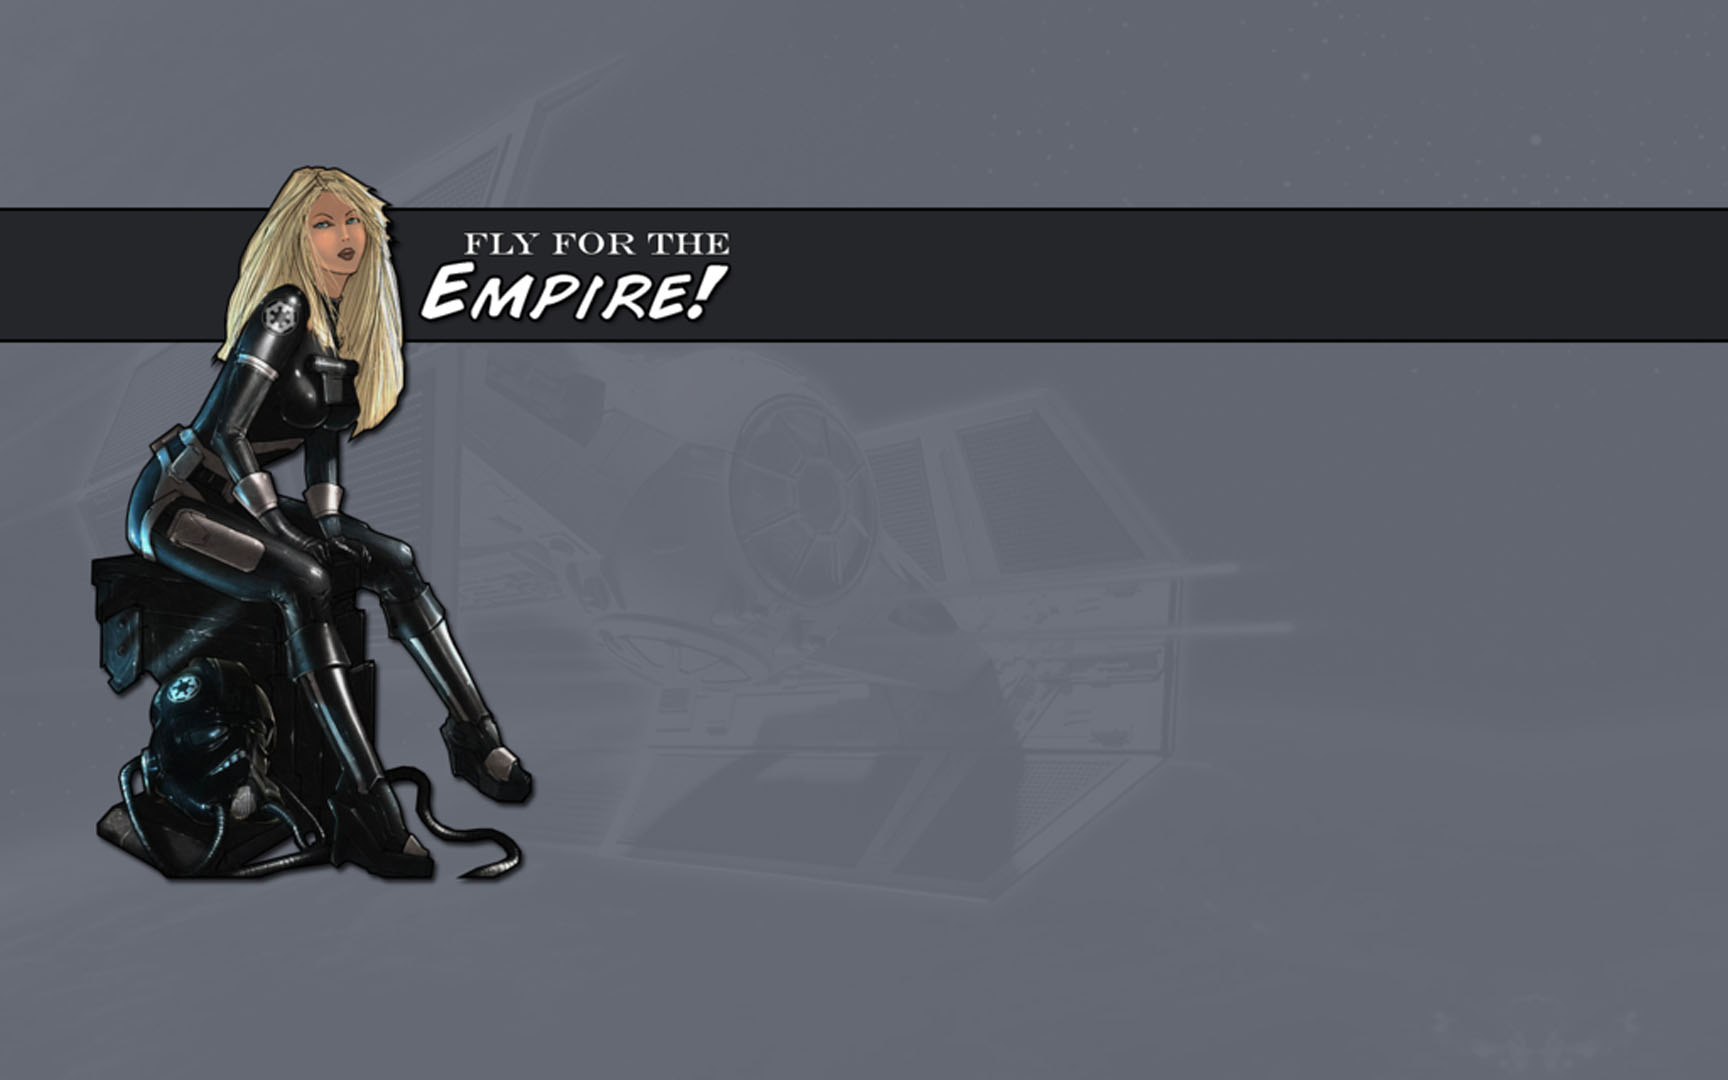 Empire Flygirl Sitting   Action Games Wallpaper Image featuring Star